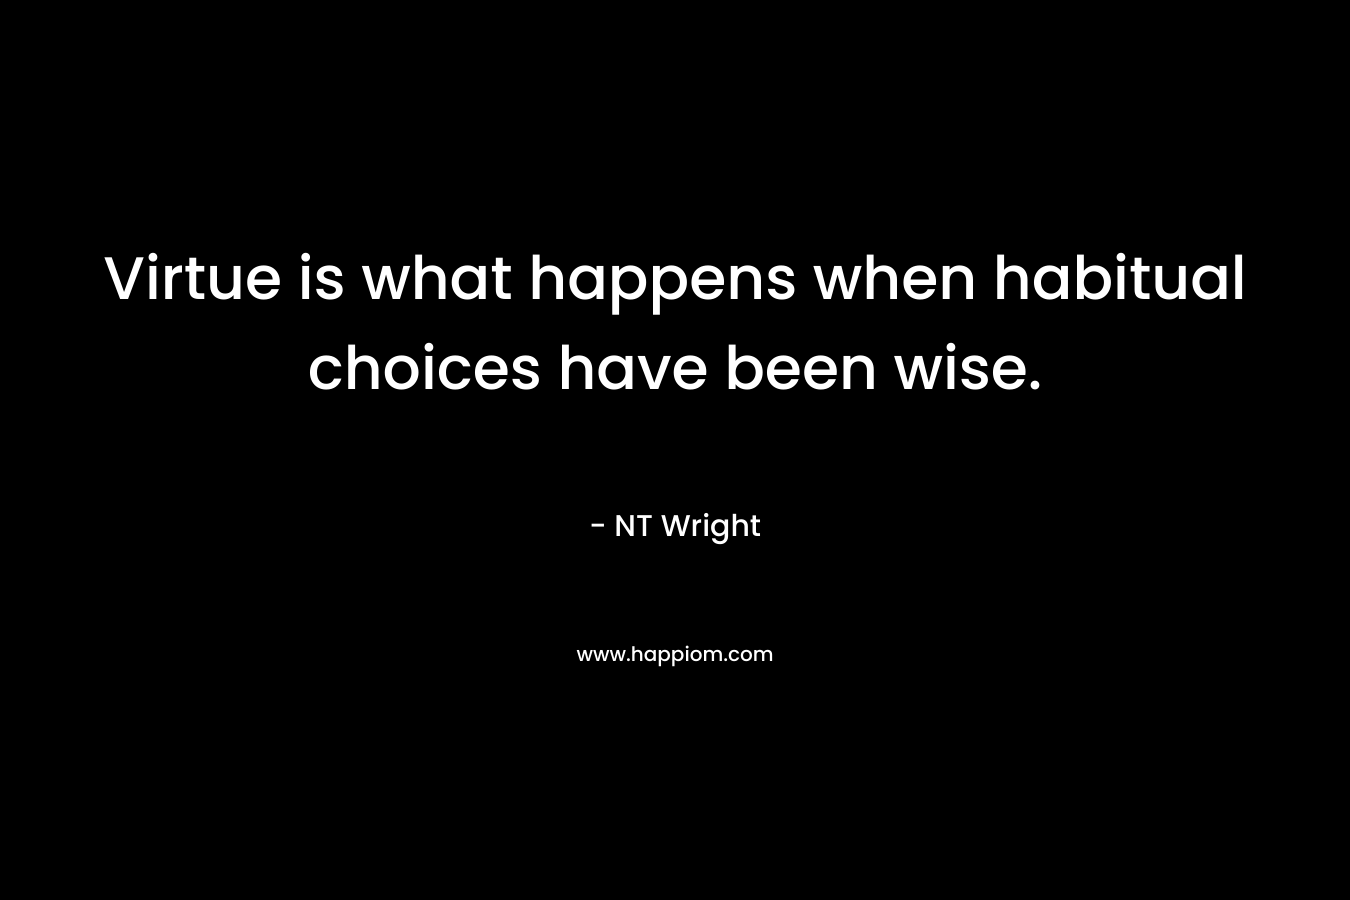 Virtue is what happens when habitual choices have been wise.